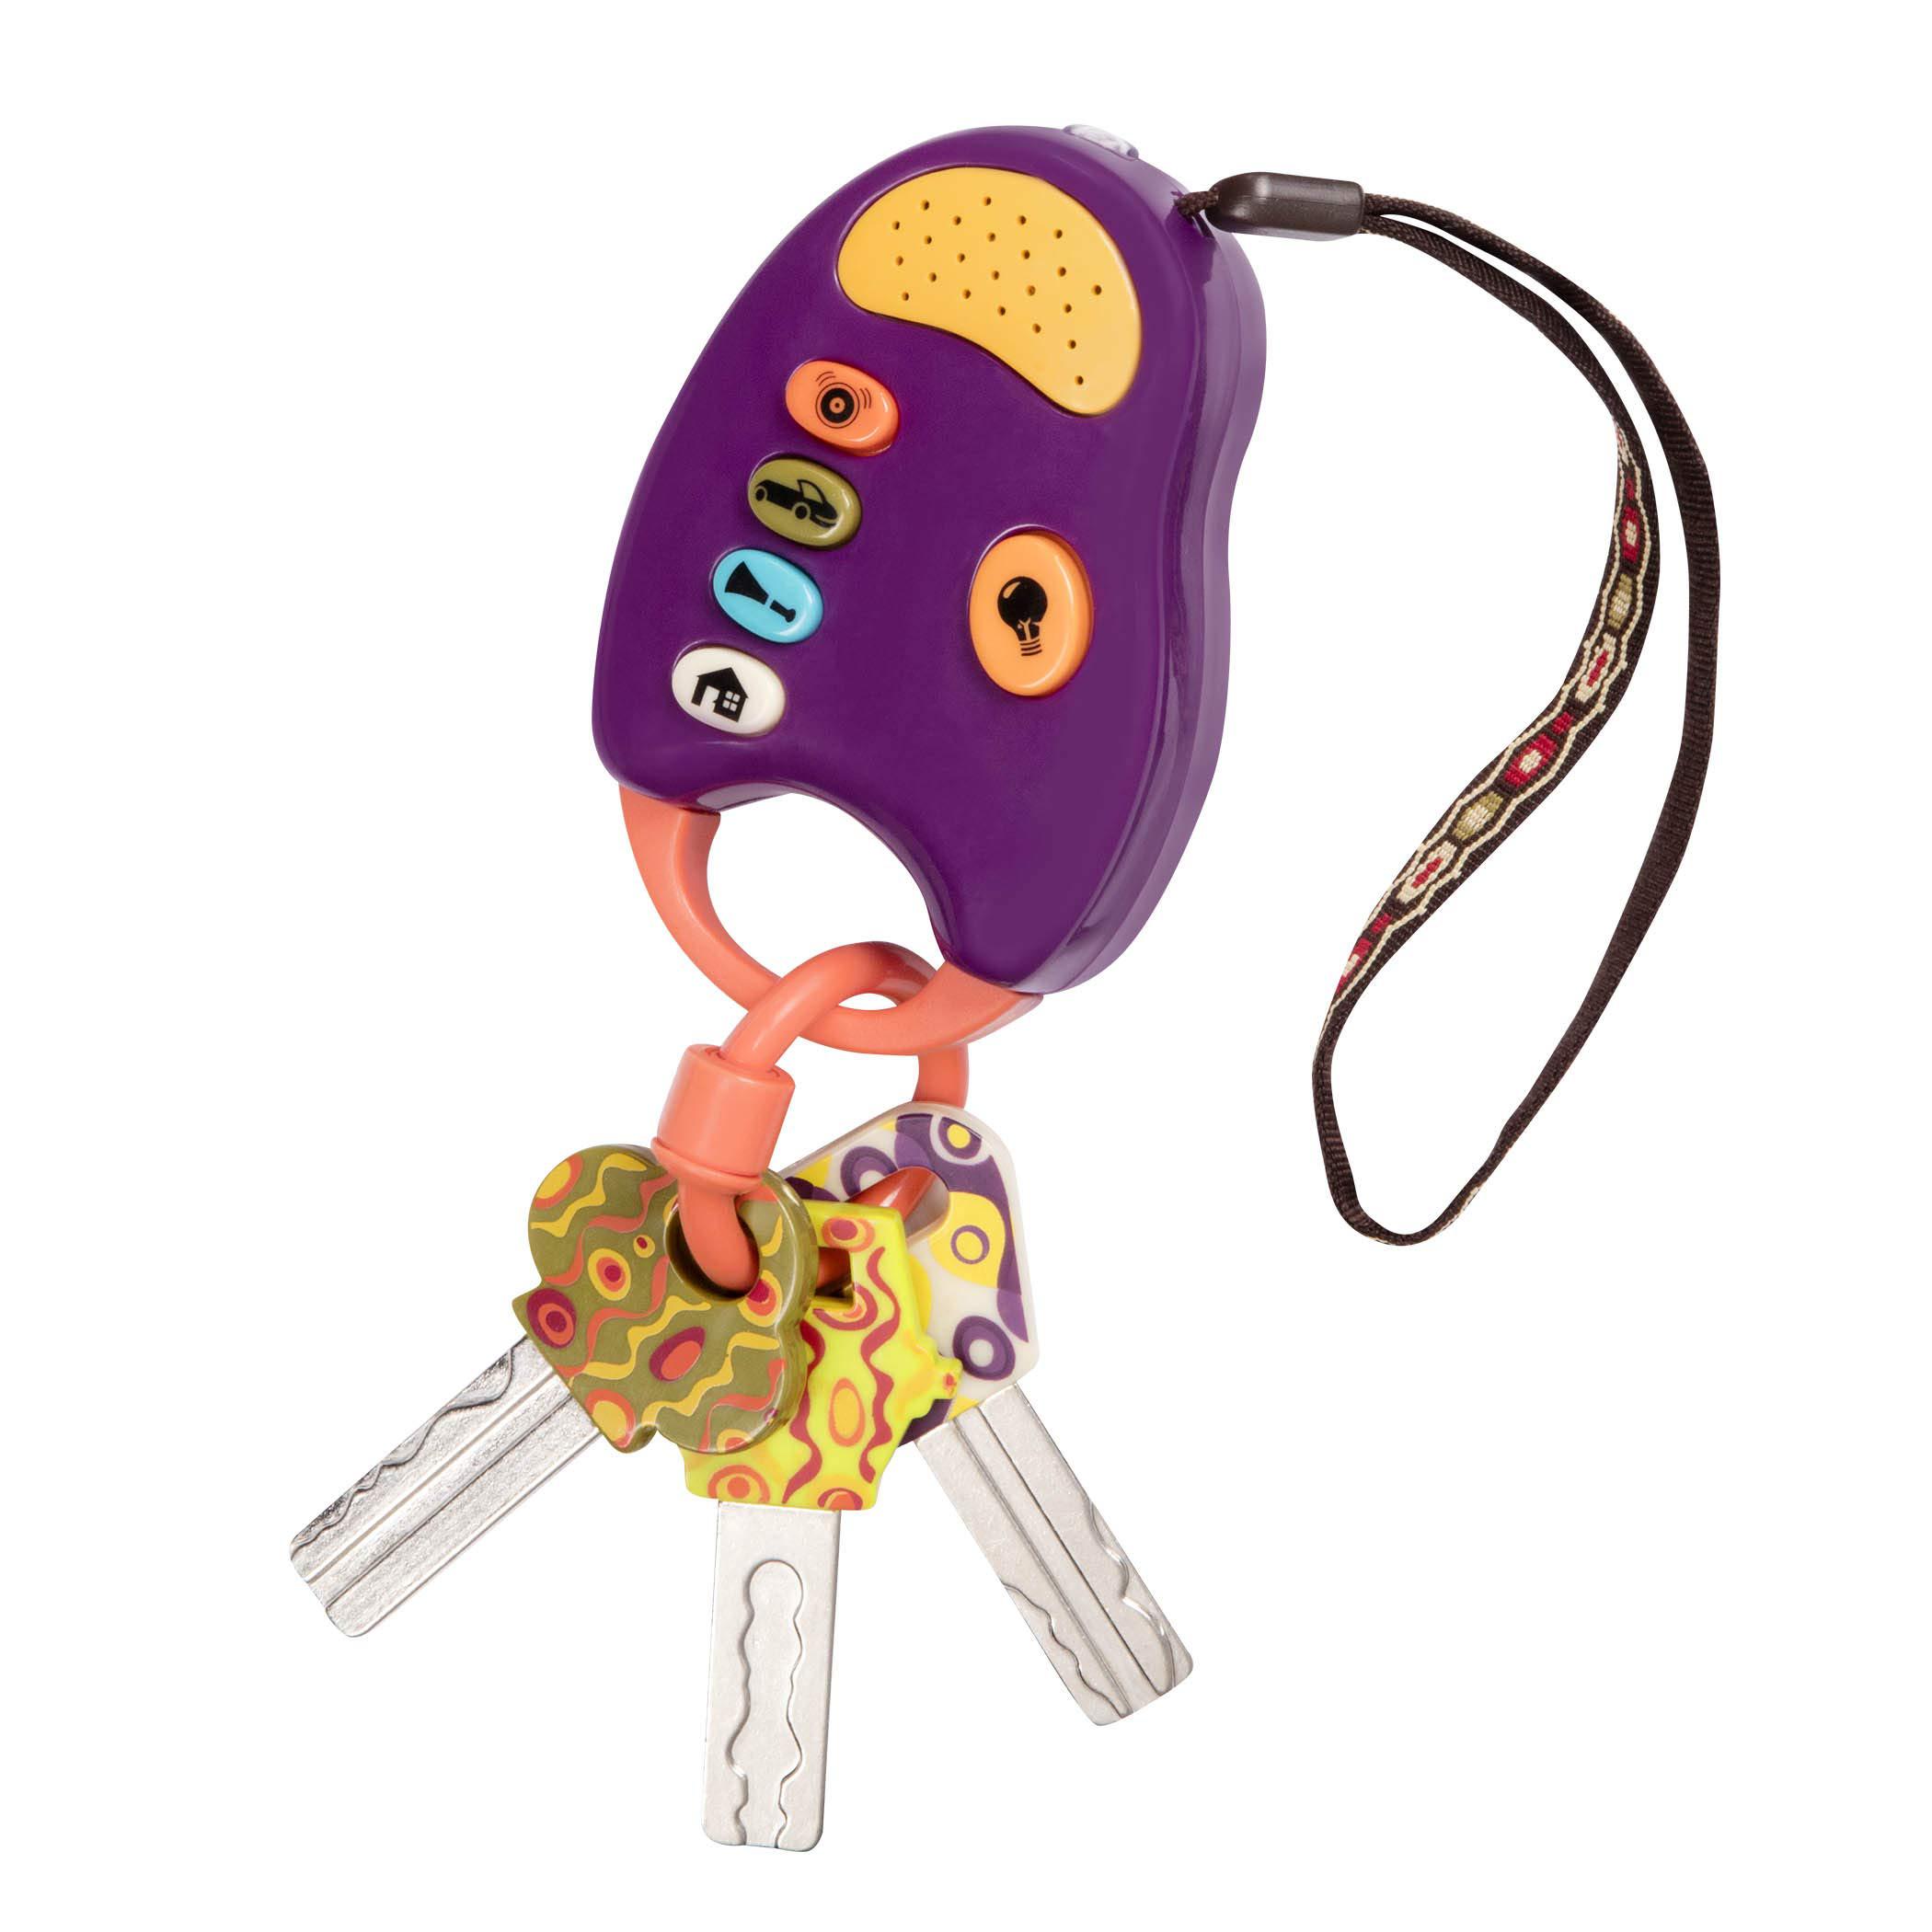 B.toys b. toys - purple funkeys - toy car keys - key fob with lights & sounds - interactive baby toy - pretend keys for babies, todd